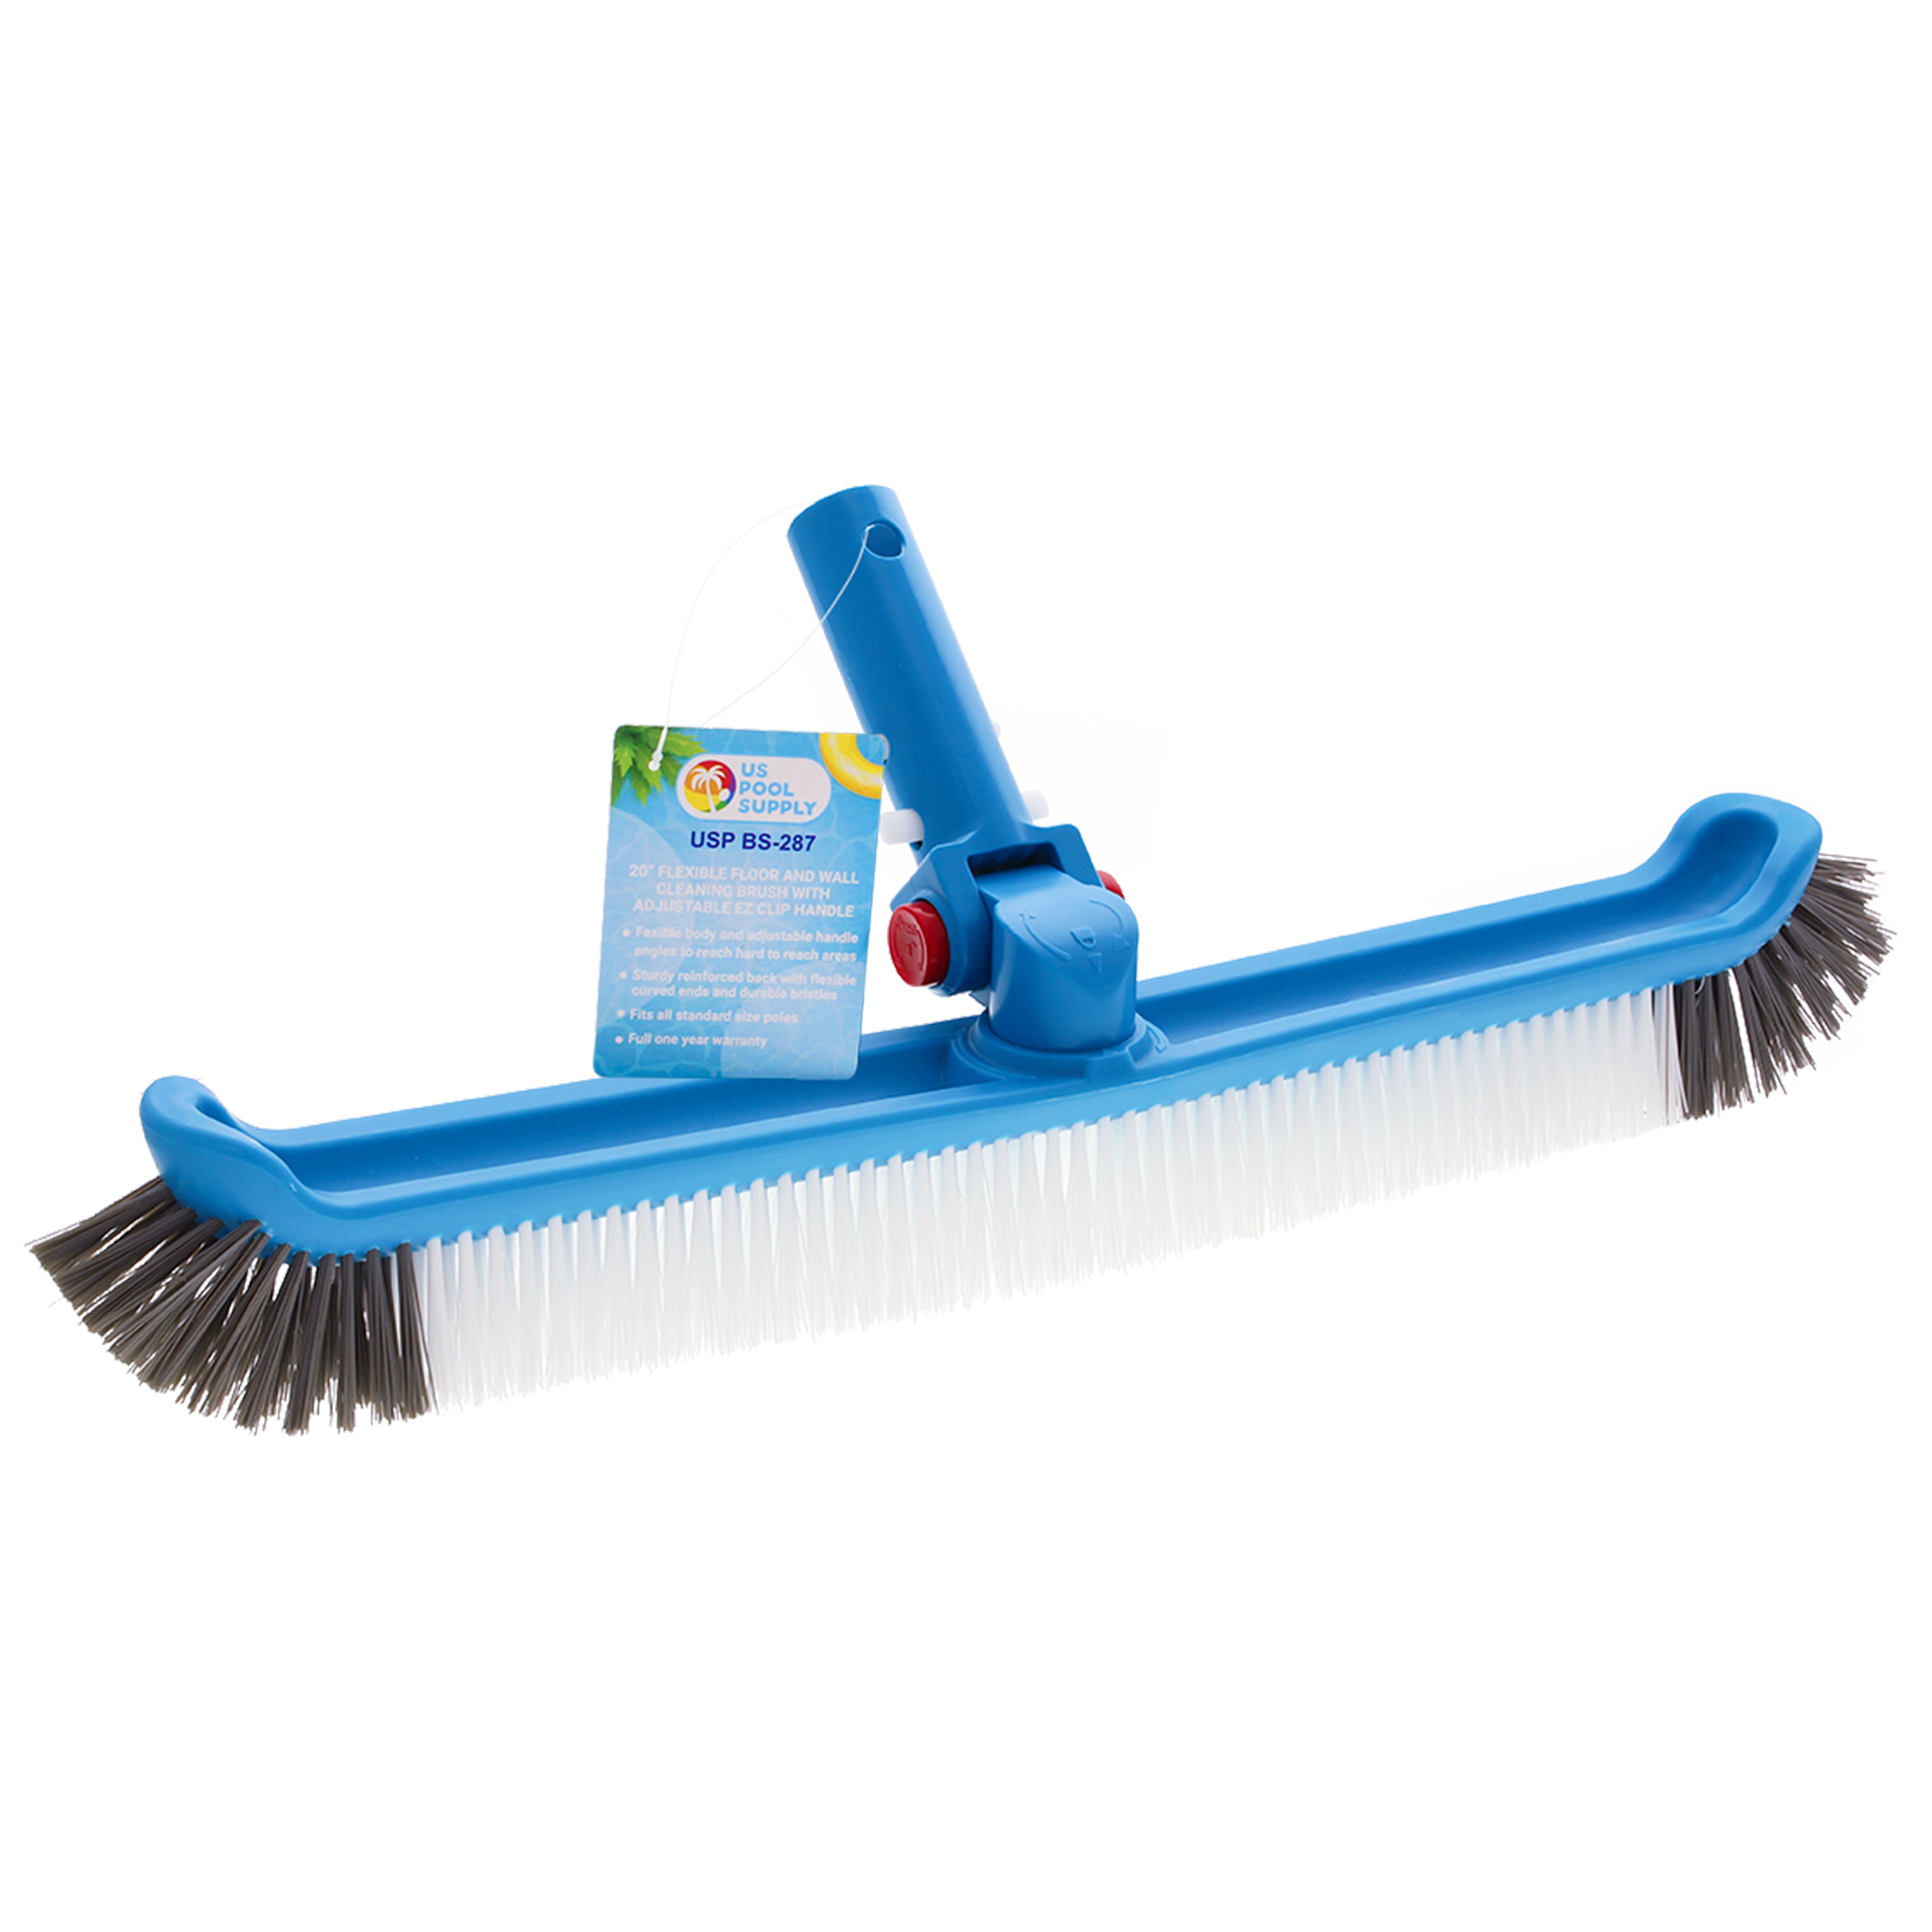 CHERRYSONG Pool Brush,18-inch Deluxe Swimming Pool Wall Brush High Cleaning Efficiency Tools Aluminum Handle for Pond Spa Hot Spring Pools,Blue/White